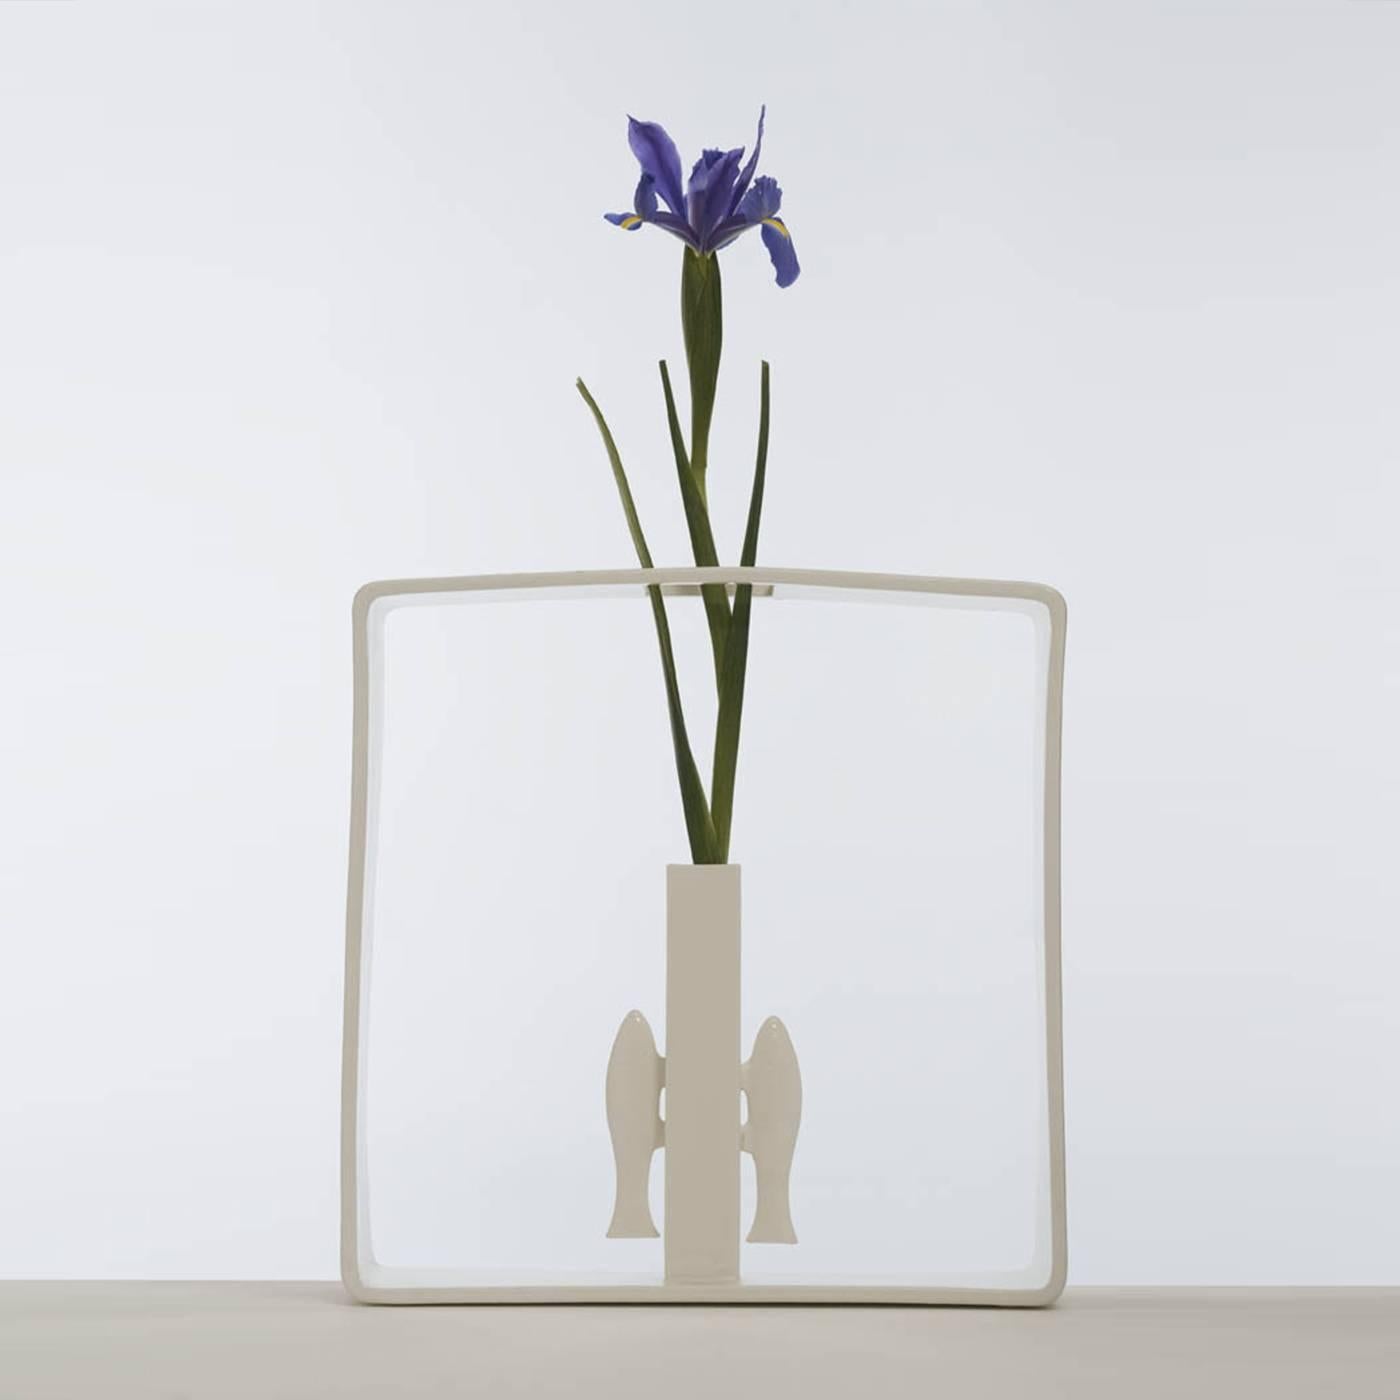 This delicate vase was created by Andrea Branzi as part of an 18-piece collection called Portali, featuring vases made in white ceramic enclosed in a square frame. In this case, the simple cylindrical shape of the vase is flanked by two vertical